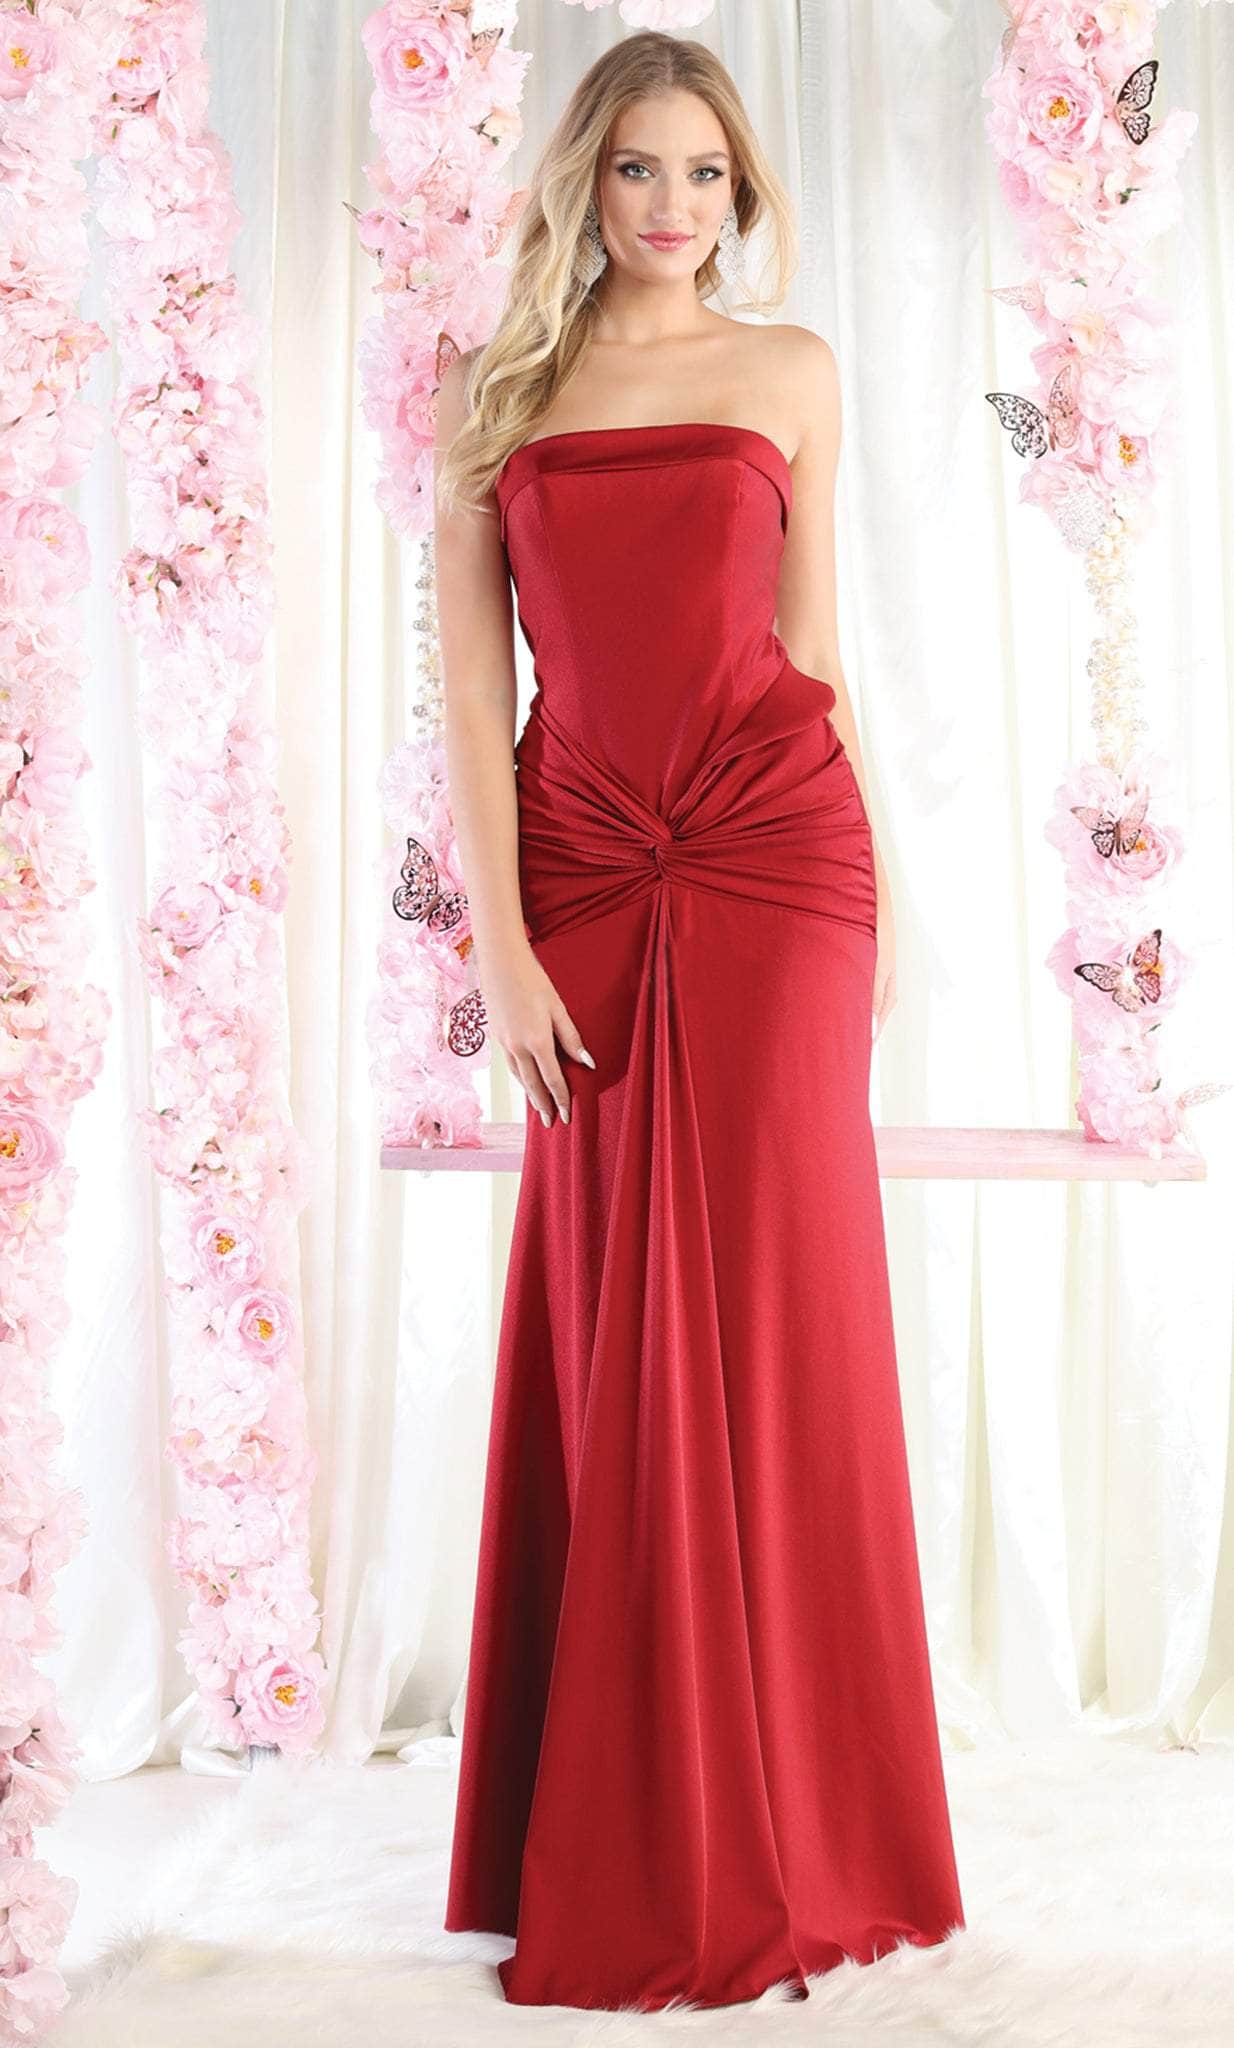 May Queen MQ1947 - Strapless Knotted Ruched Prom Gown Prom Dresses 4 / Burgundy